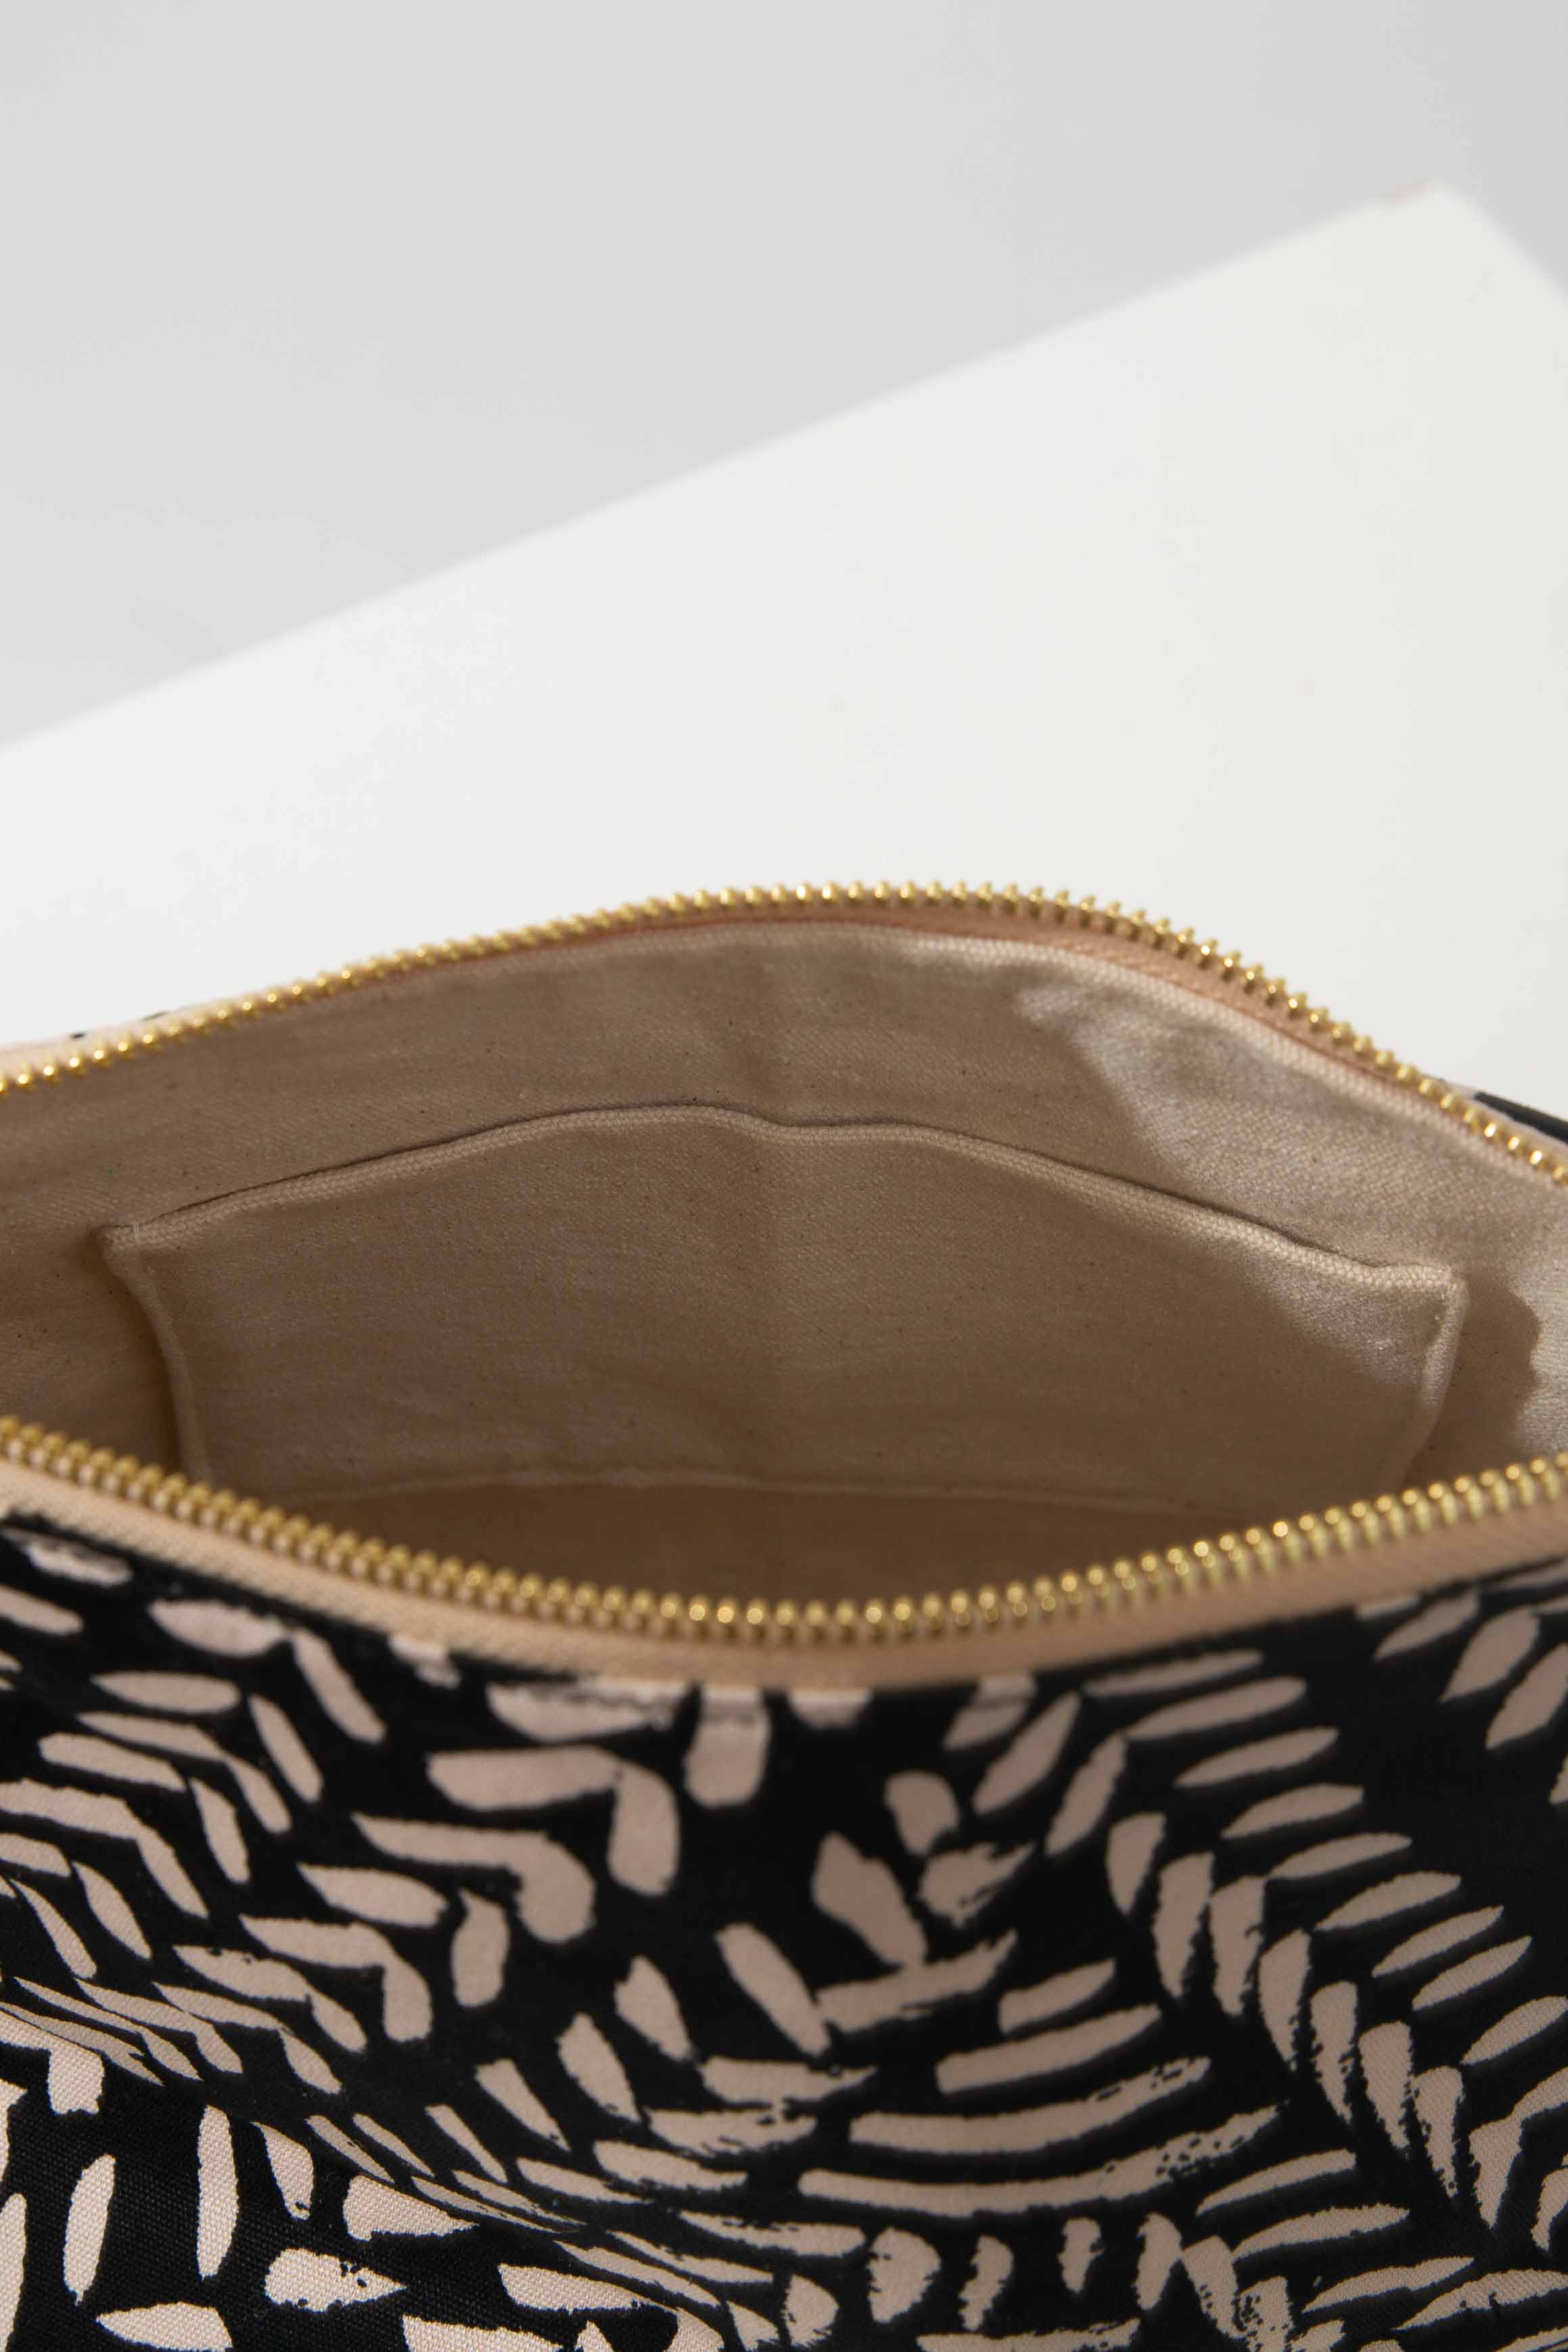 The Carryall Cosmetic Bag sits unzipped, revealing the interior back wall. It has a solid, tan fabric lining and a fabric slot pocket stitched into the back wall.